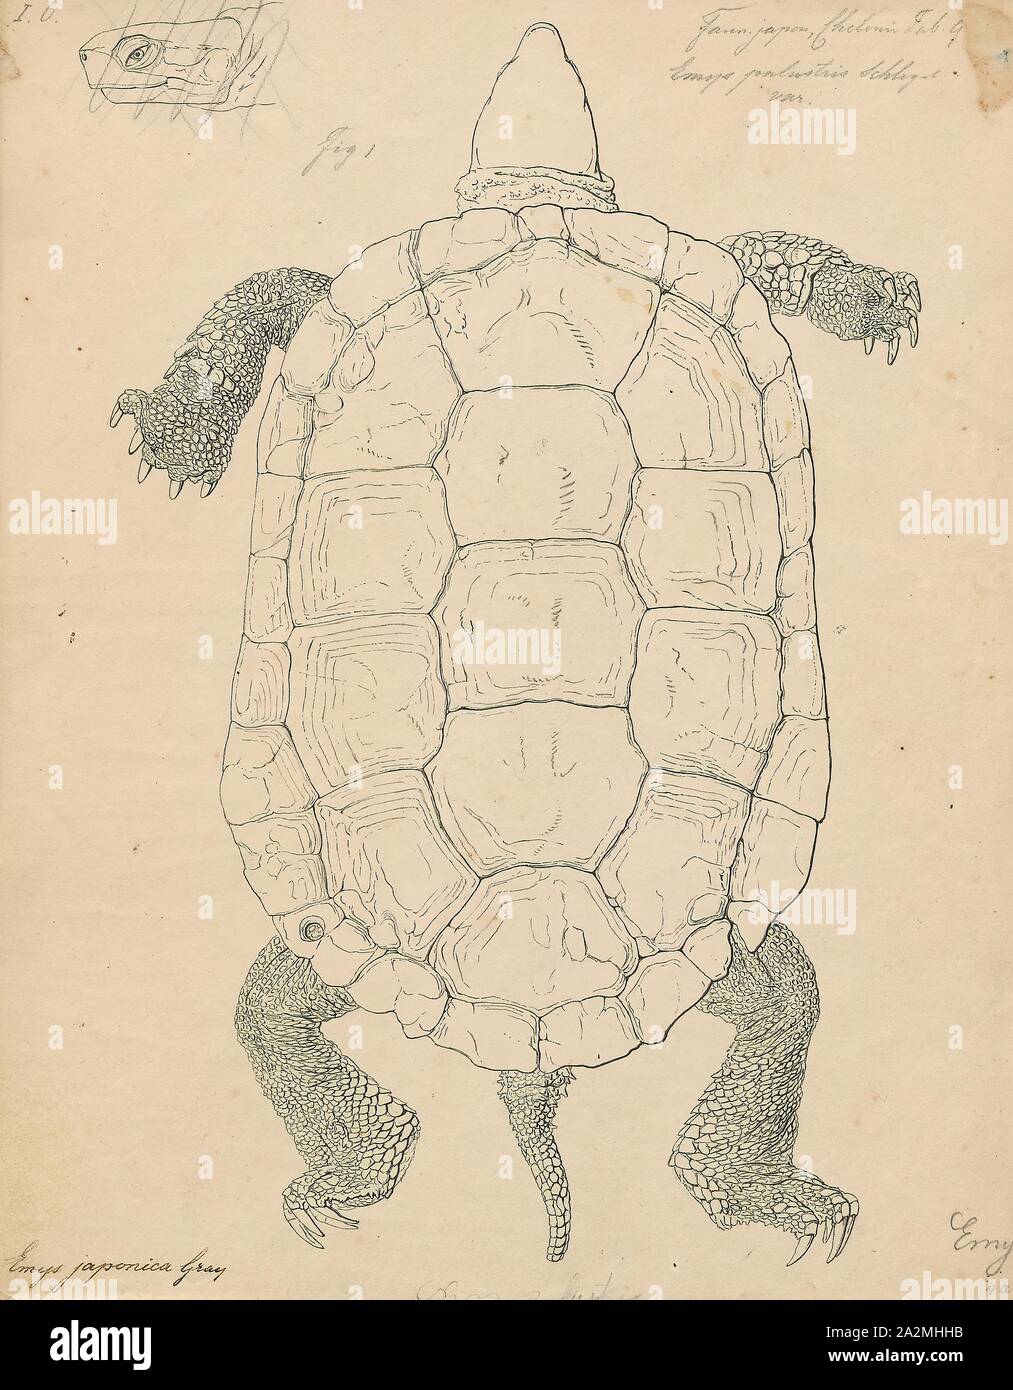 Emys japonica, Print, The Japanese pond turtle (Mauremys japonica) is a species of turtle in the family Geoemydidae endemic to Japan. Its Japanese name is nihon ishigame, Japanese stone turtle. Its population has decreased somewhat due to habitat loss, but it is not yet considered a threatened species., 1700-1880 Stock Photo